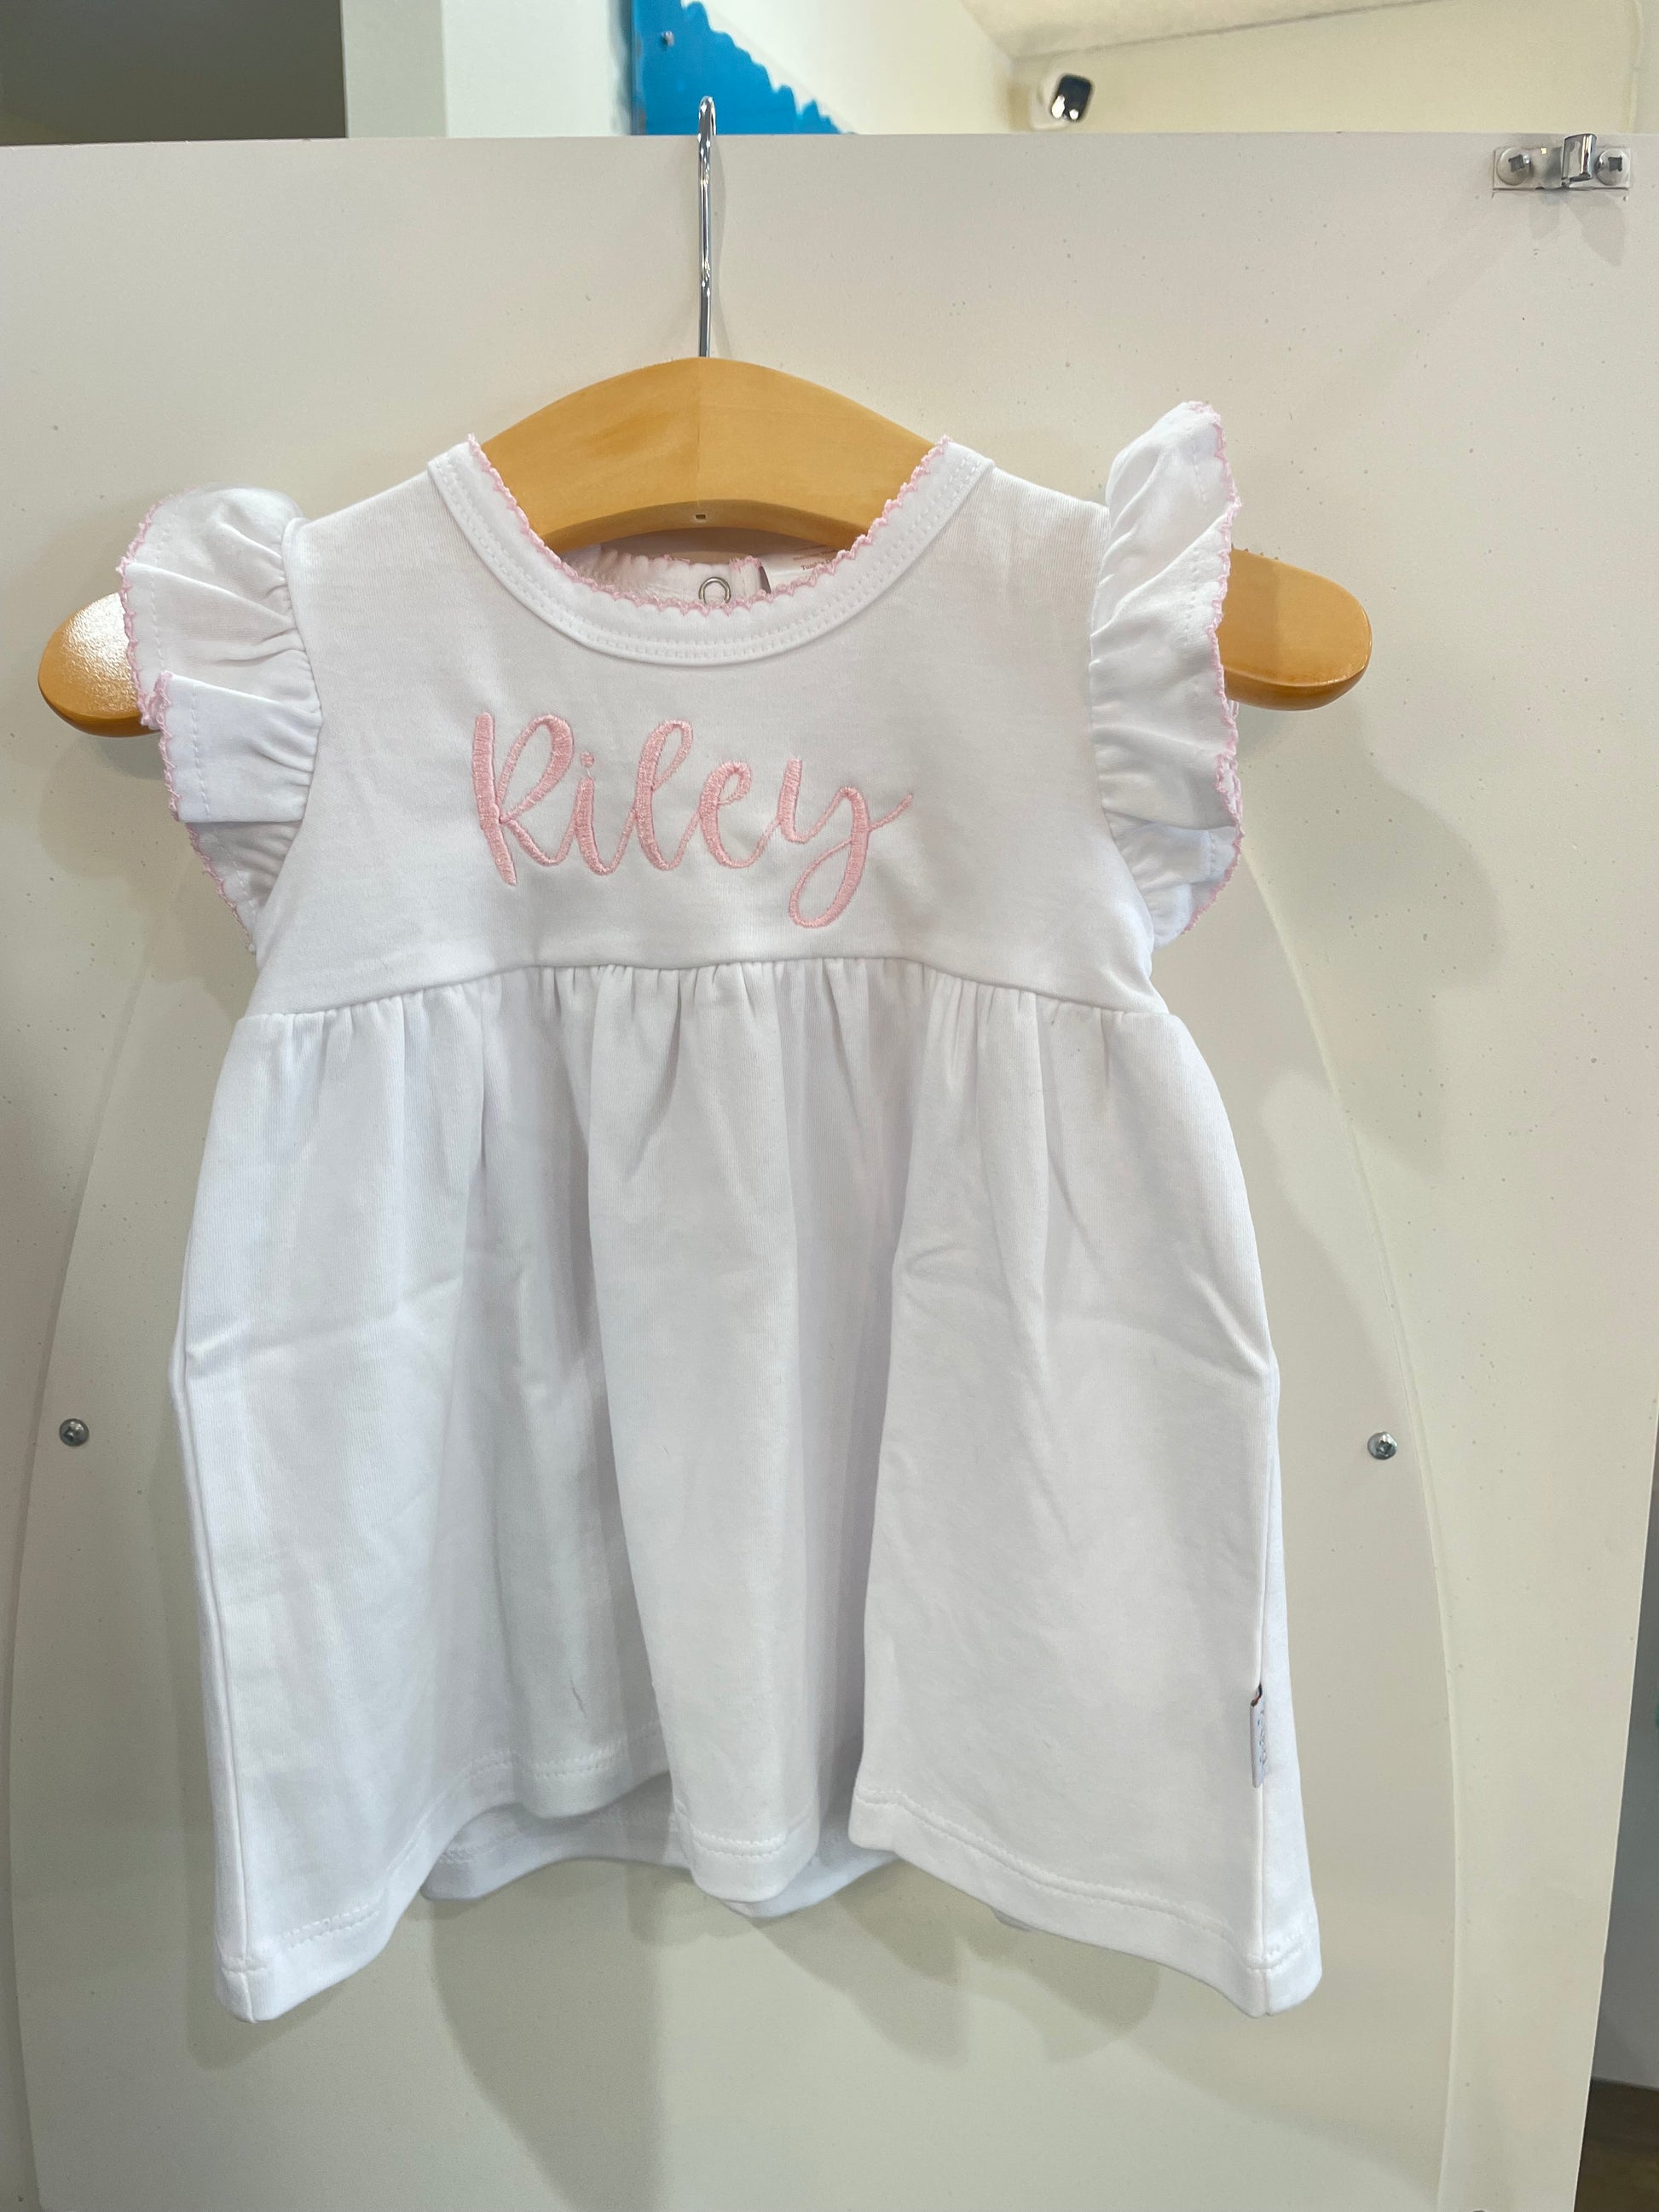 A Paty Ruffle Cotton Dress with a pink name on it.